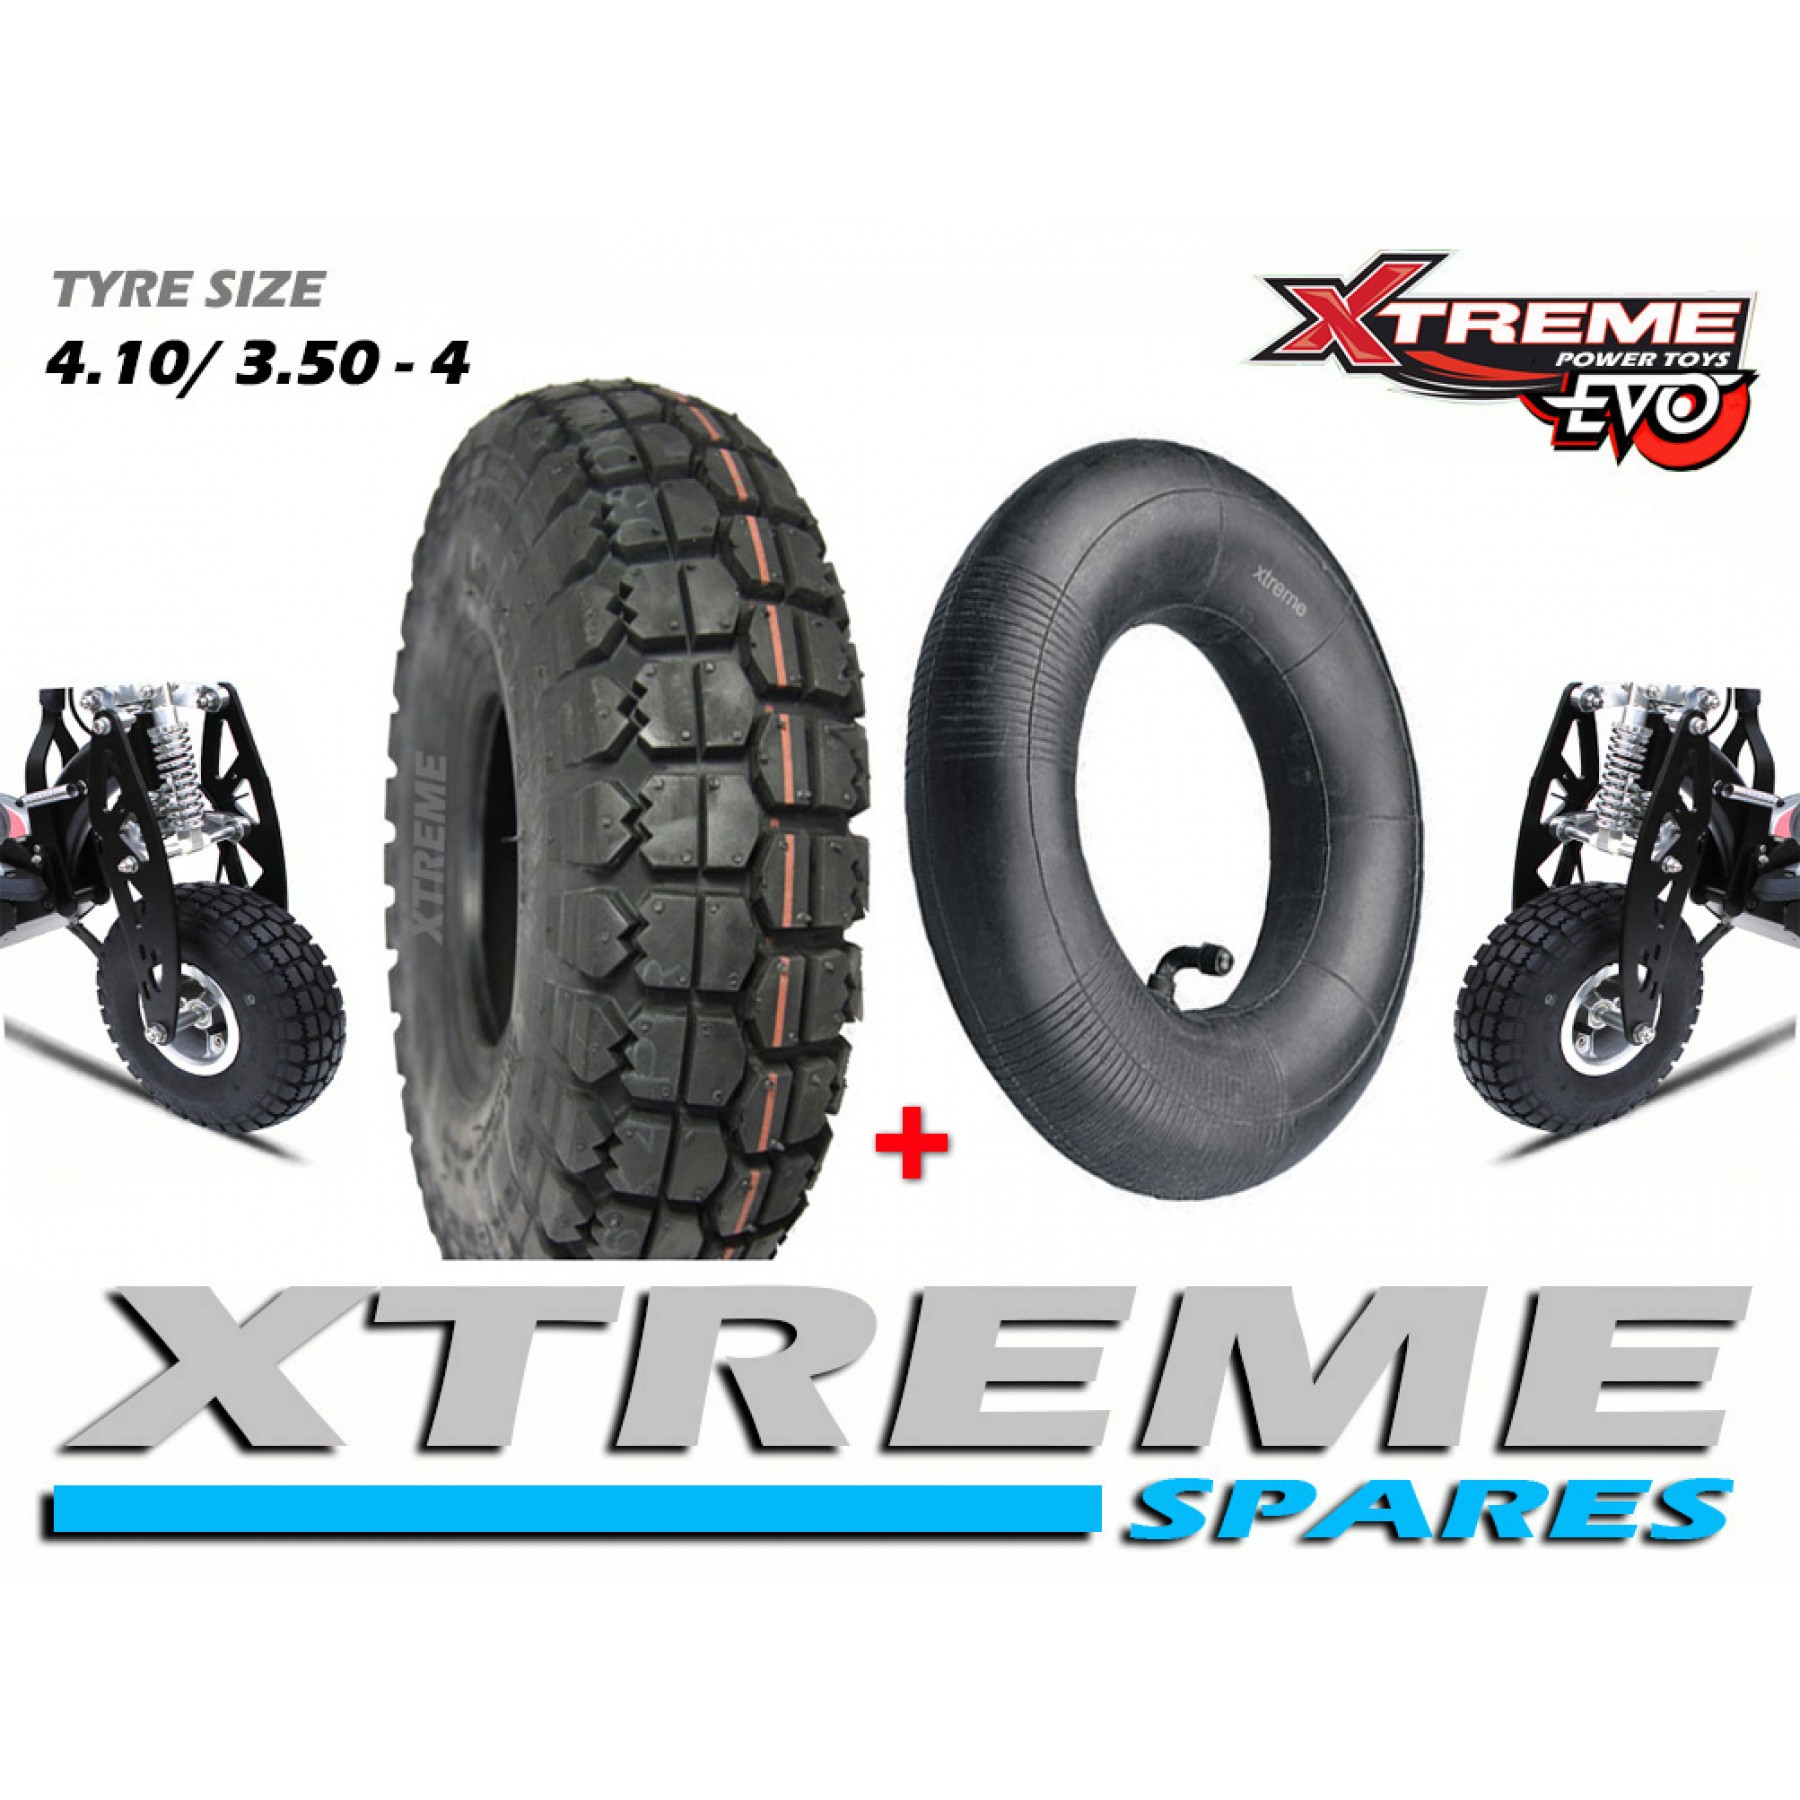 EVO SCOOTER TYRE 4.10/3.50-4 WITH INNER TUBE